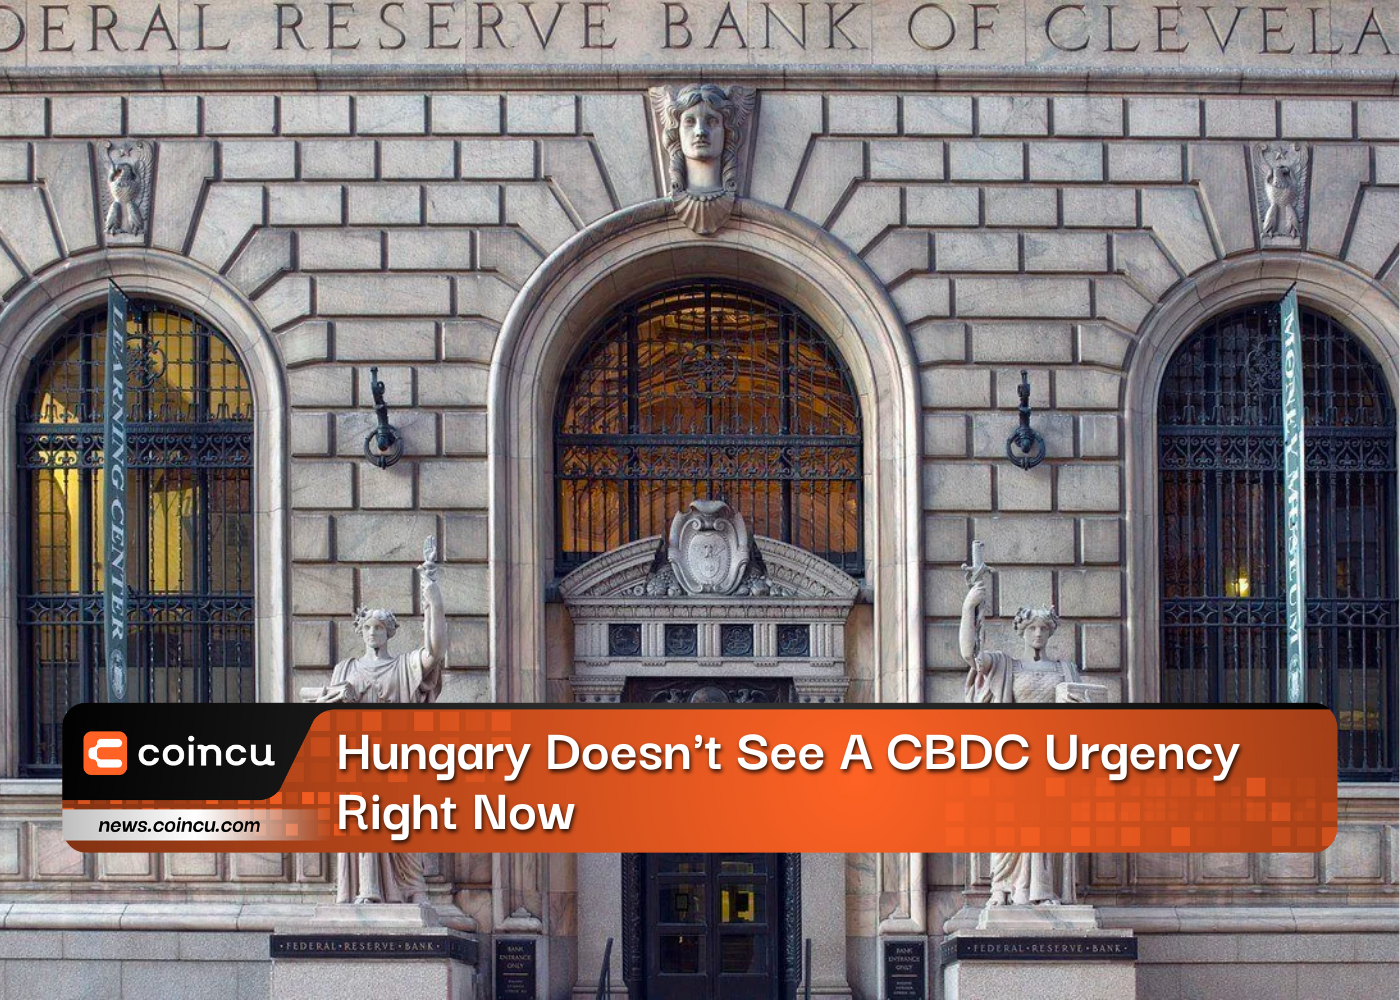 Hungary Doesn't See A CBDC Urgency Right Now